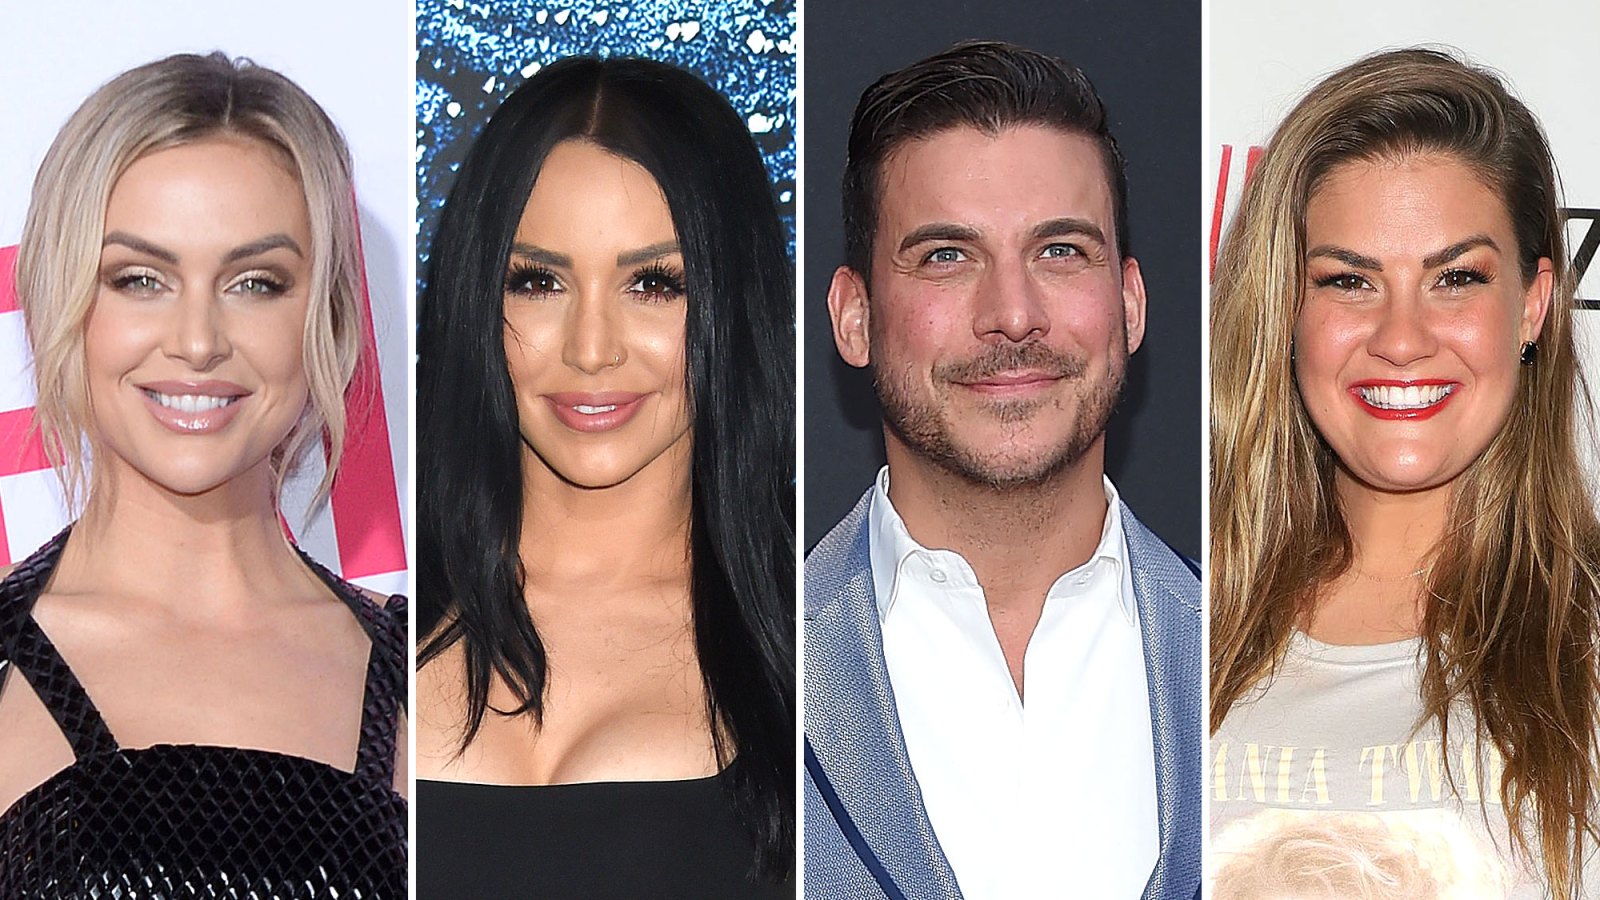 https://www.usmagazine.com/wp-content/uploads/2020/09/Lala-Kent-and-Scheana-Shay-Both-Attend-Jax-Taylor-and-Brittany-Cartwright-Gender-Reveal-Party.jpg?crop=0px%2C0px%2C2000px%2C1131px&resize=1600%2C900&quality=86&strip=all